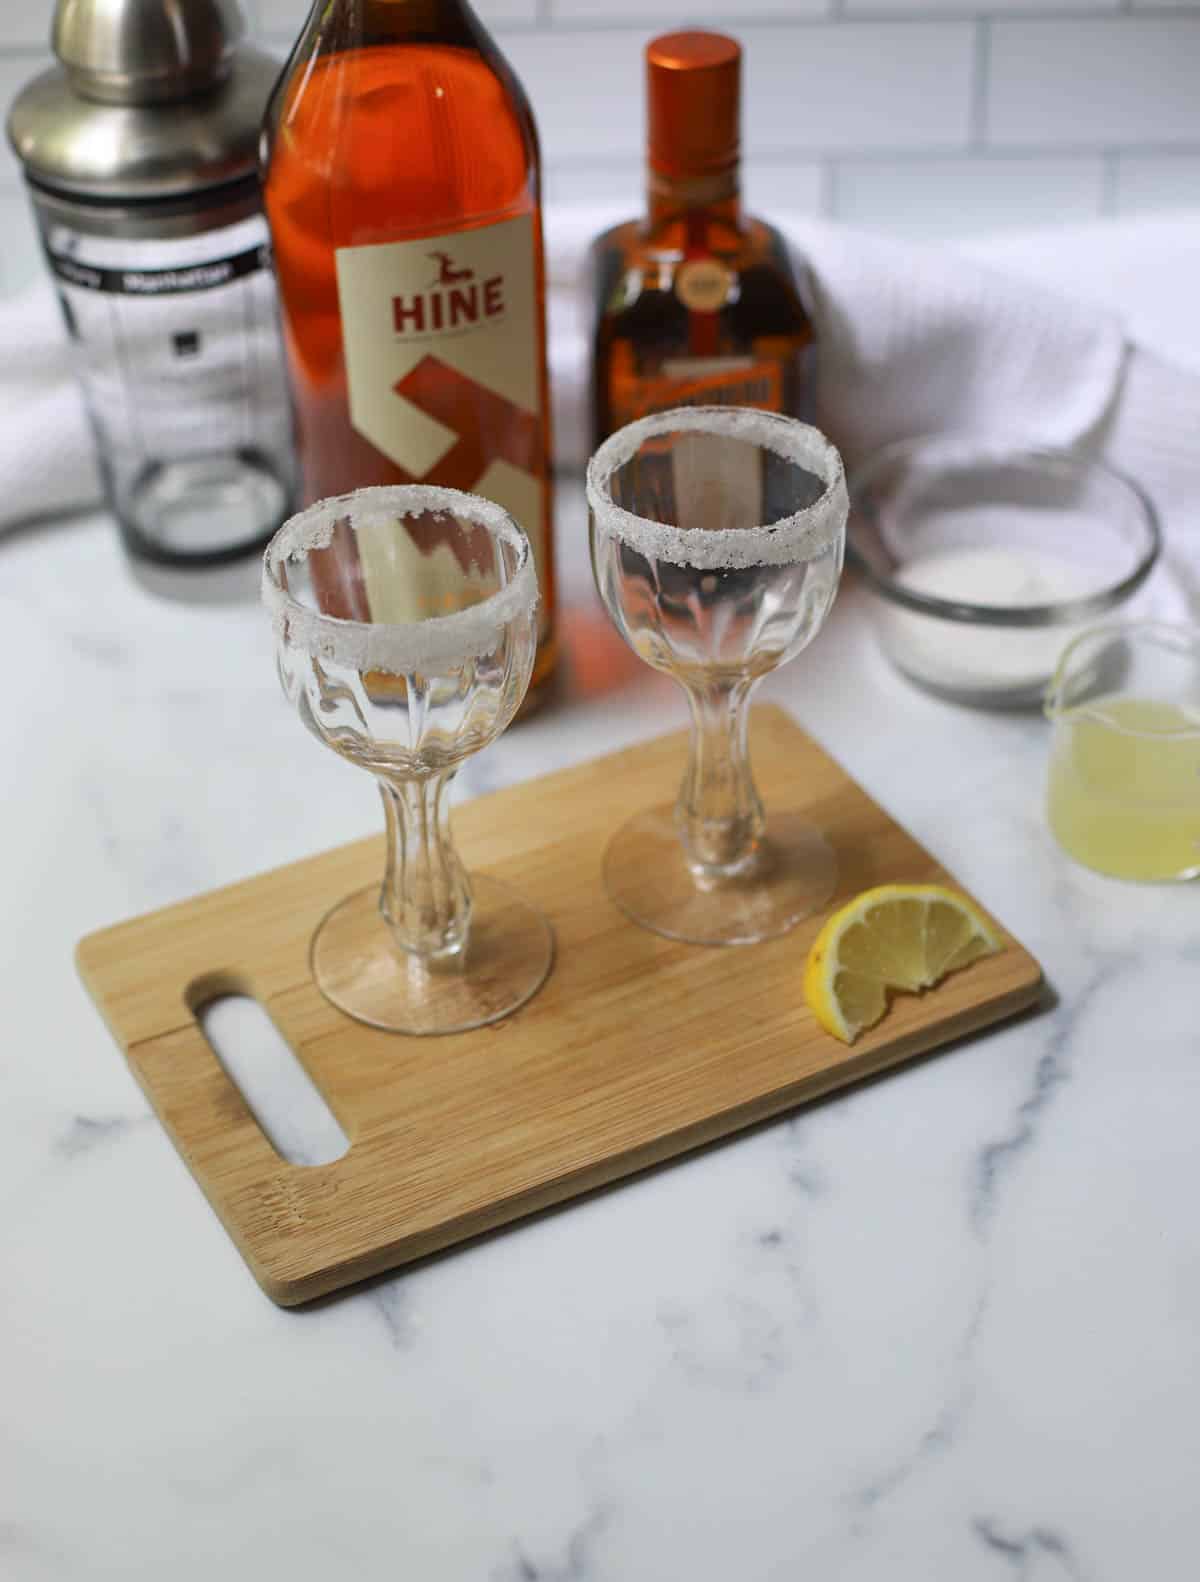 Two glasses rimmed with sugar on cutting board with lemon with bottles and shaker in background.